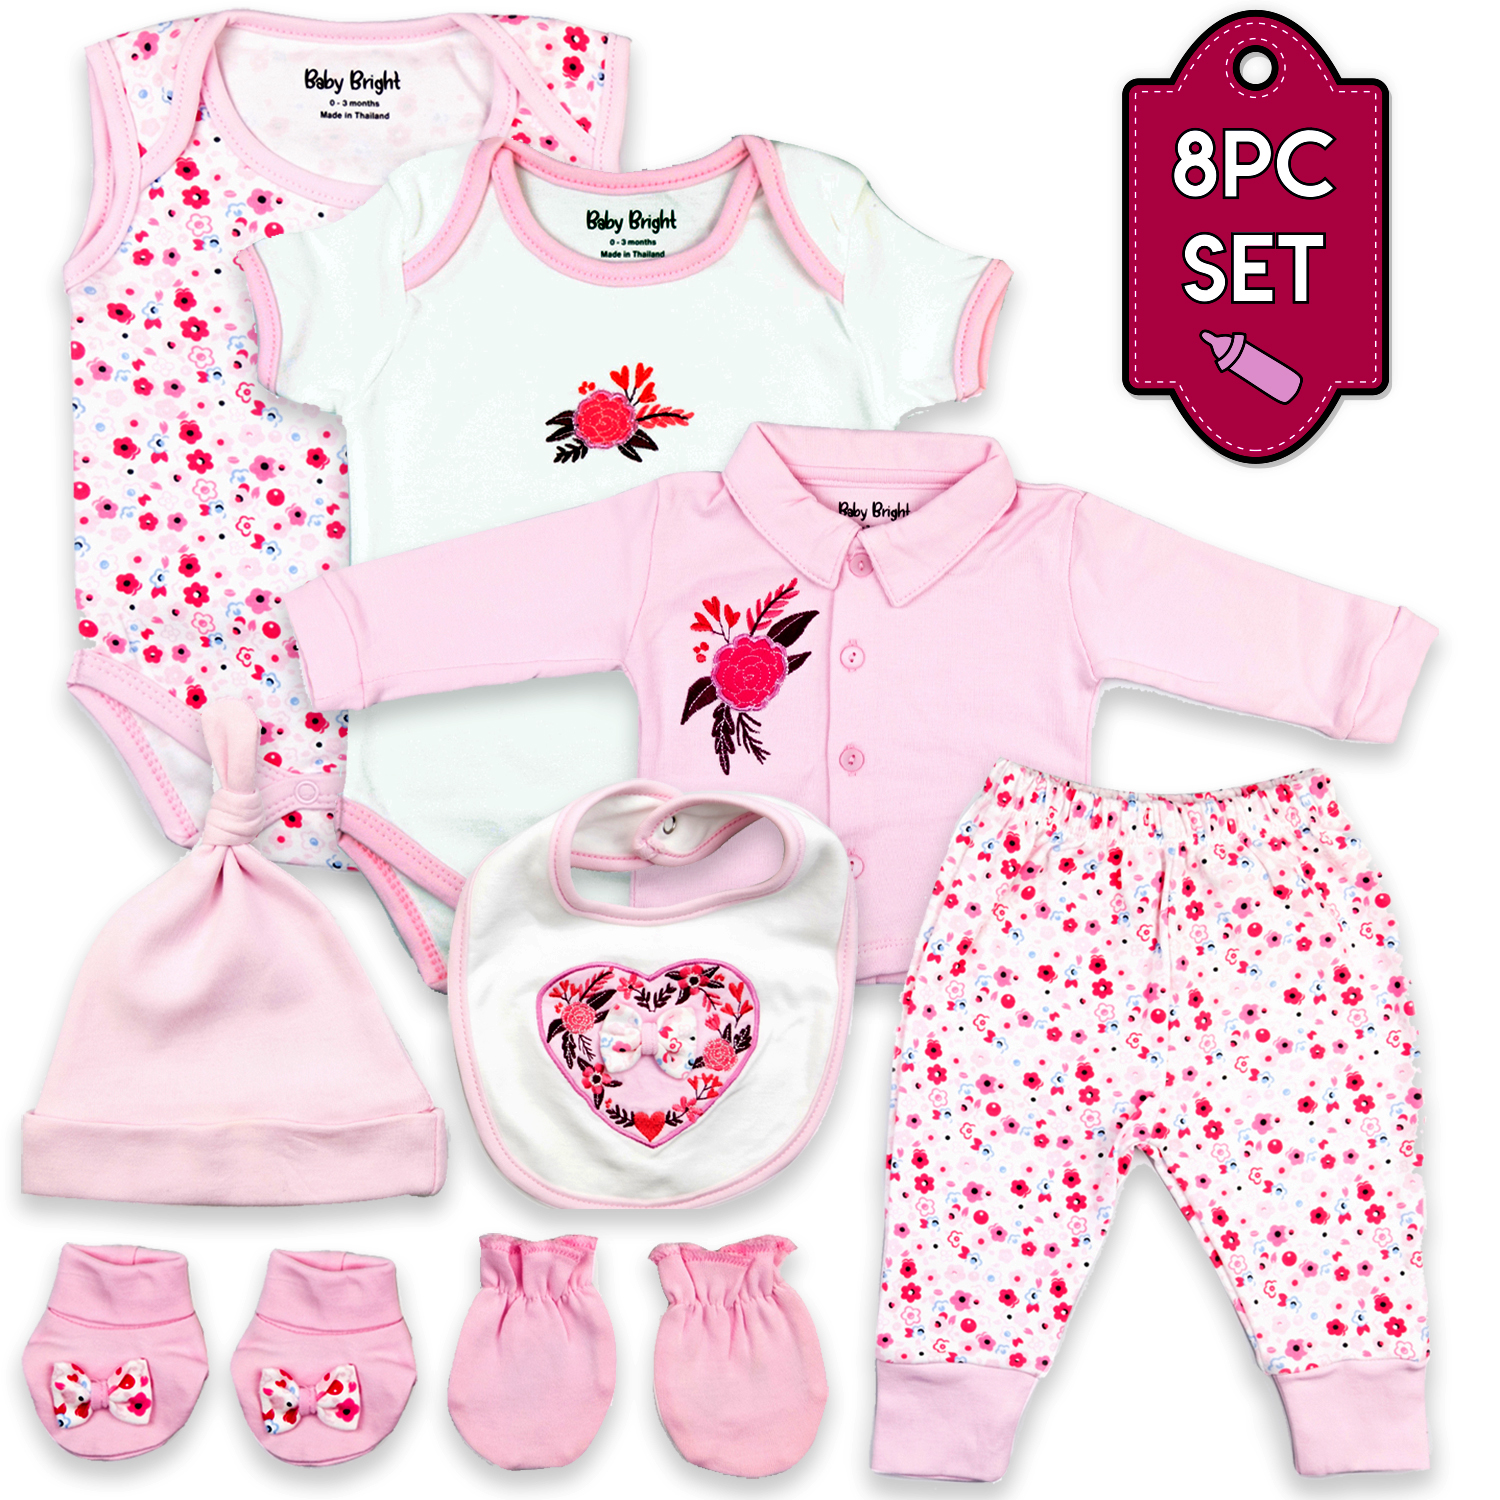 Layette Baby Junior in Pink 